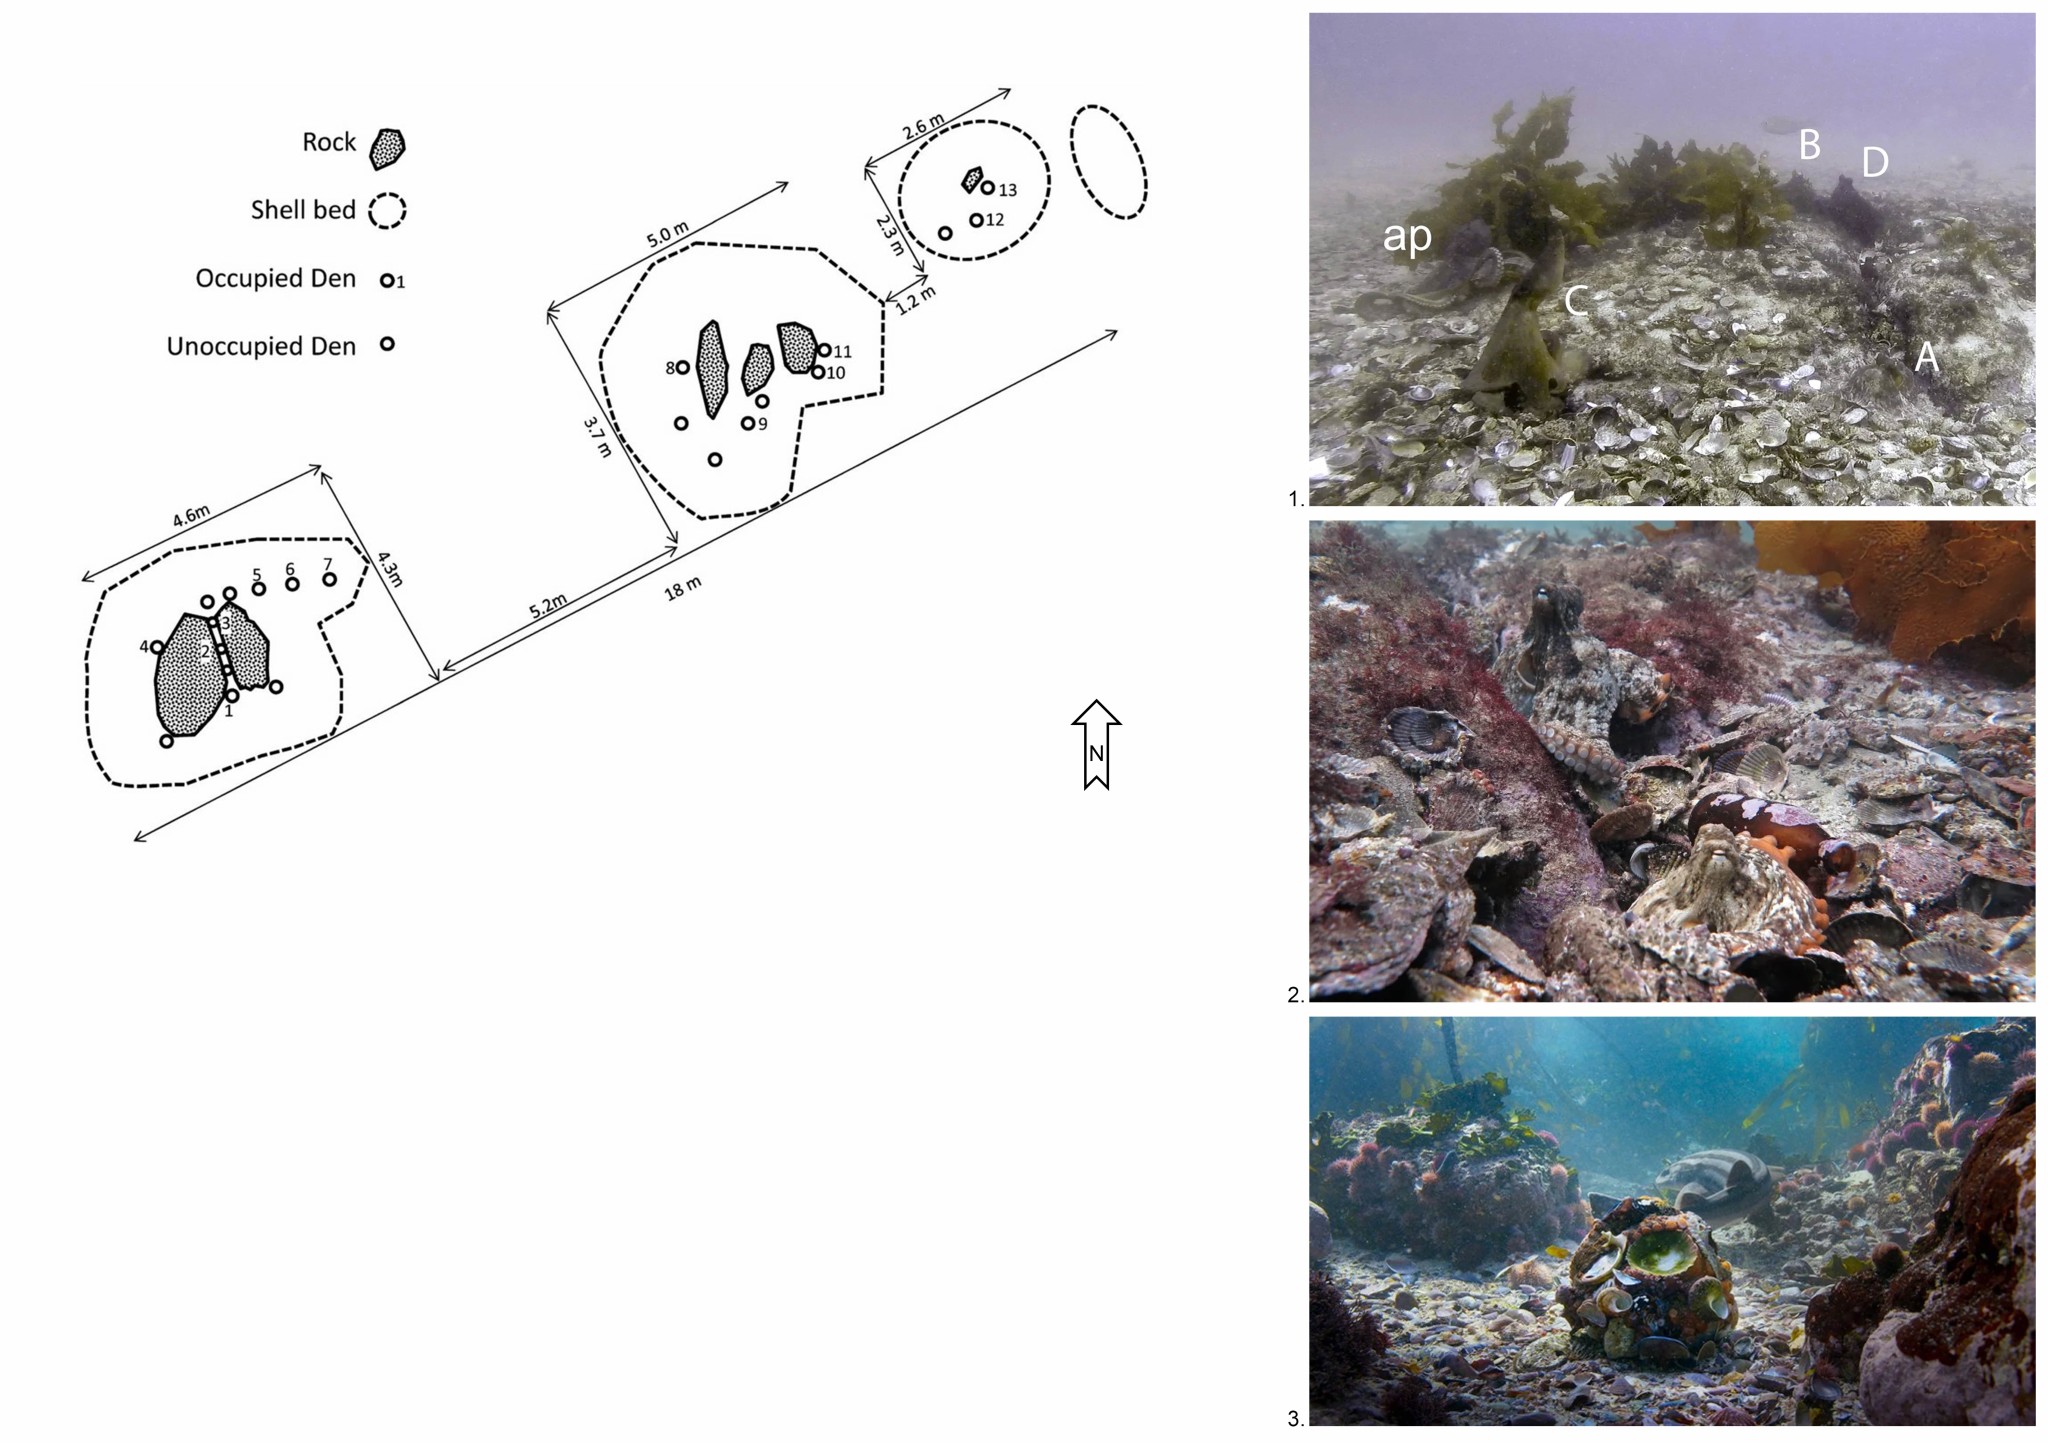 Diagram and images of Octlantis, the newly found octopus colony where different specimens cohabitate in a self produced environment.